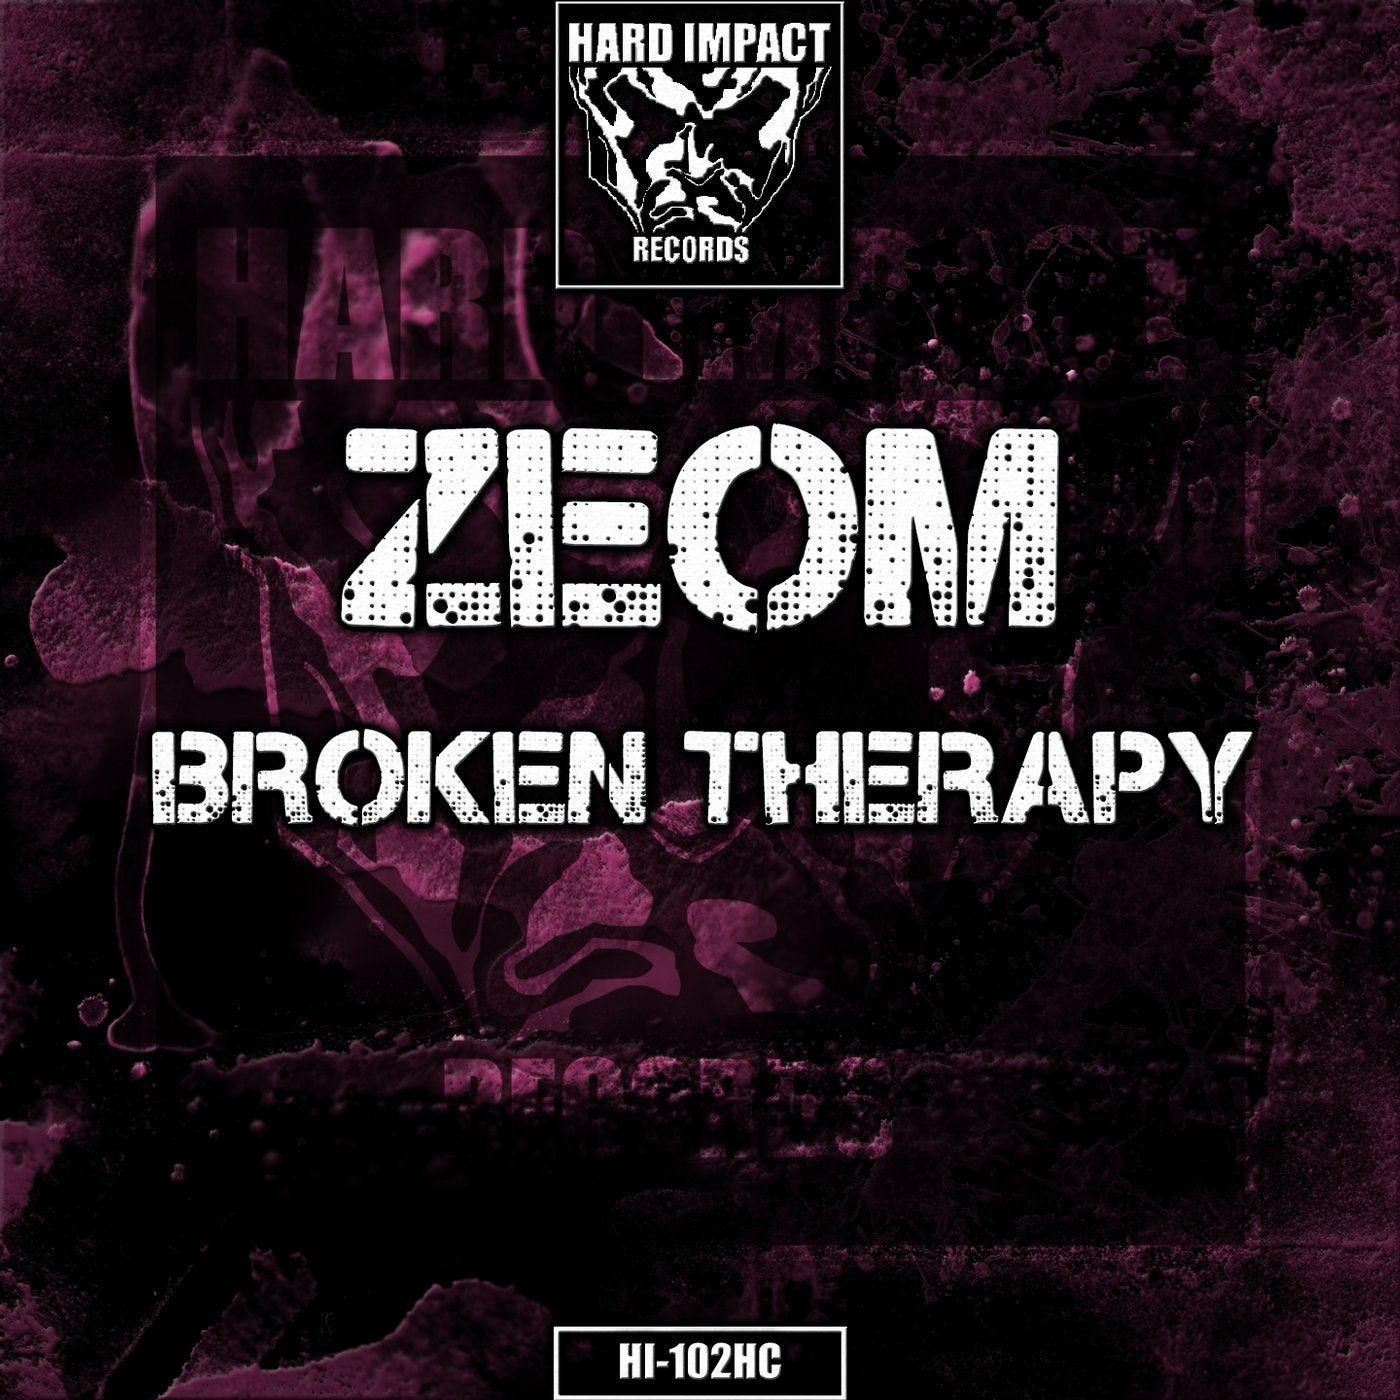 Broken Therapy